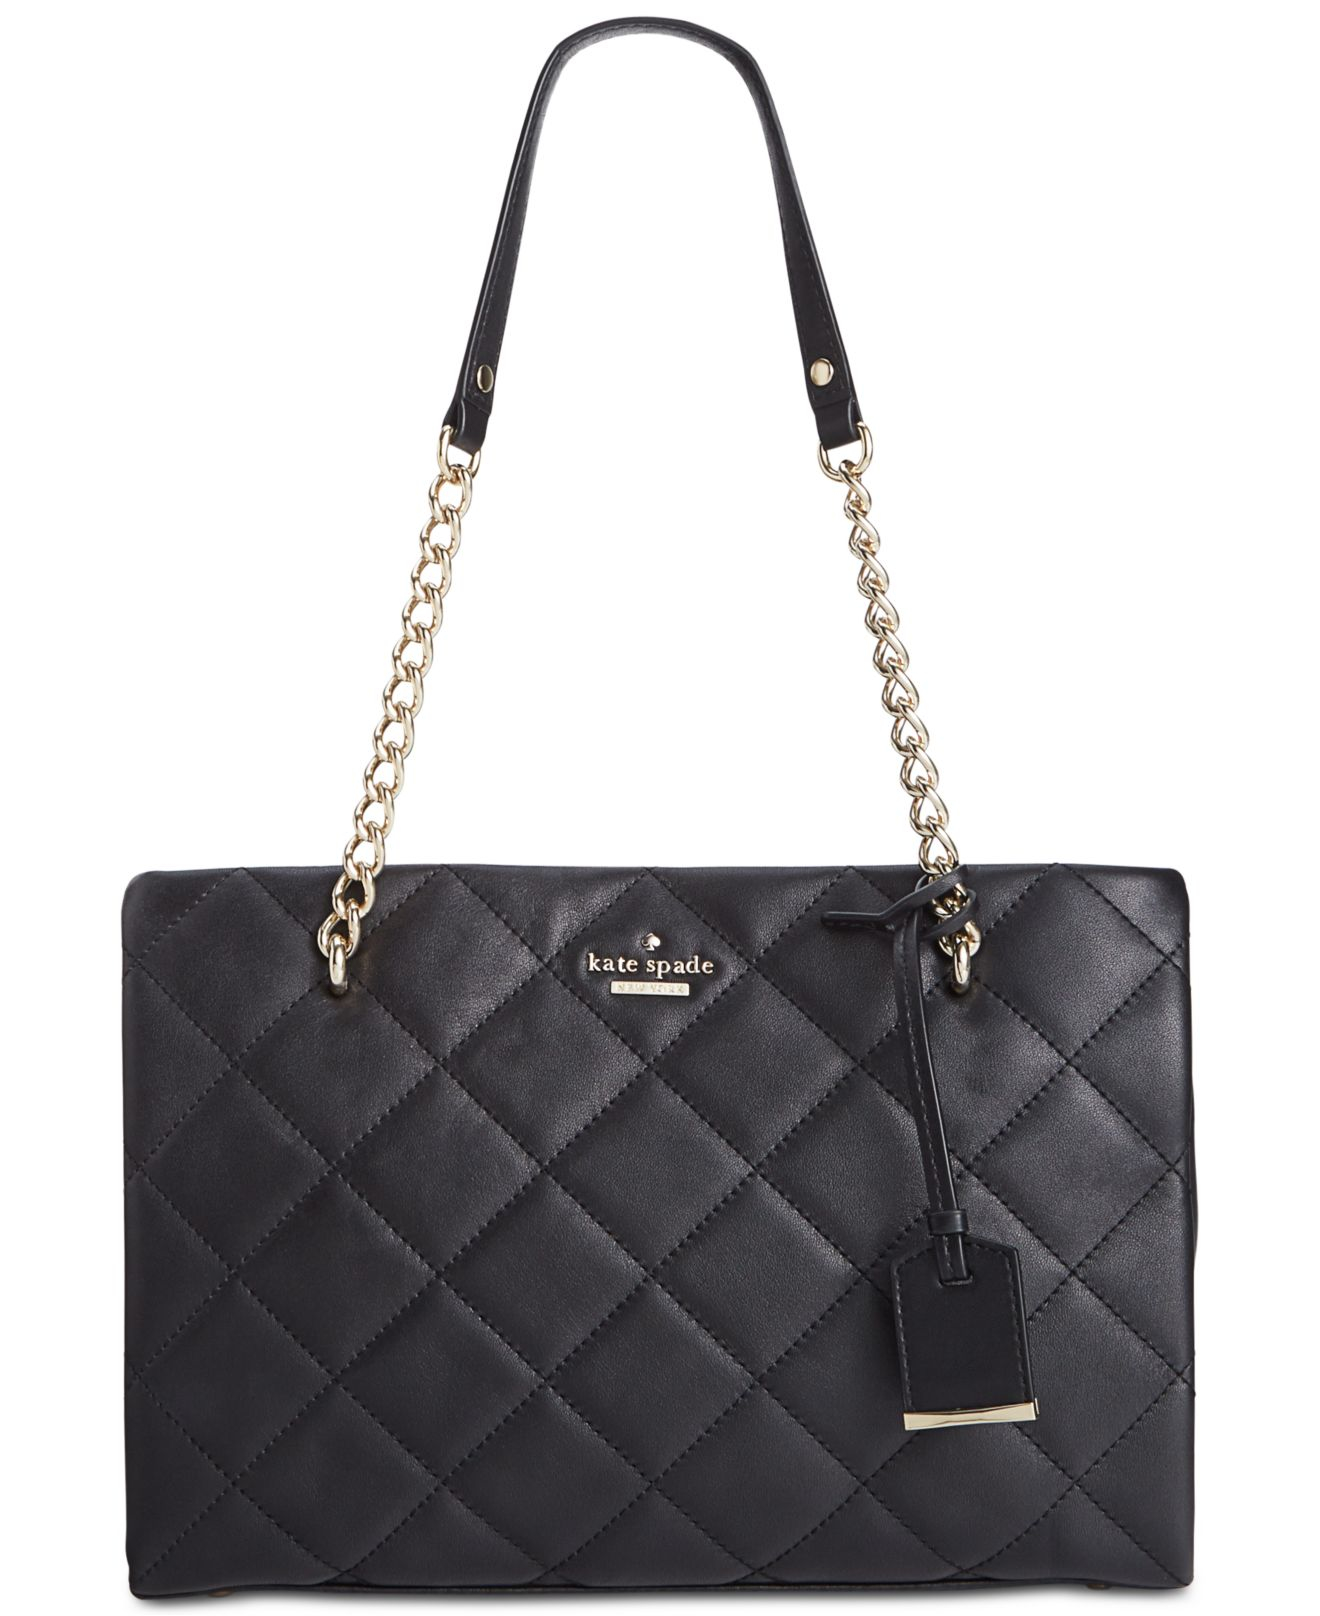 Kate spade Emerson Place Small Phoebe Shoulder Bag in Black | Lyst